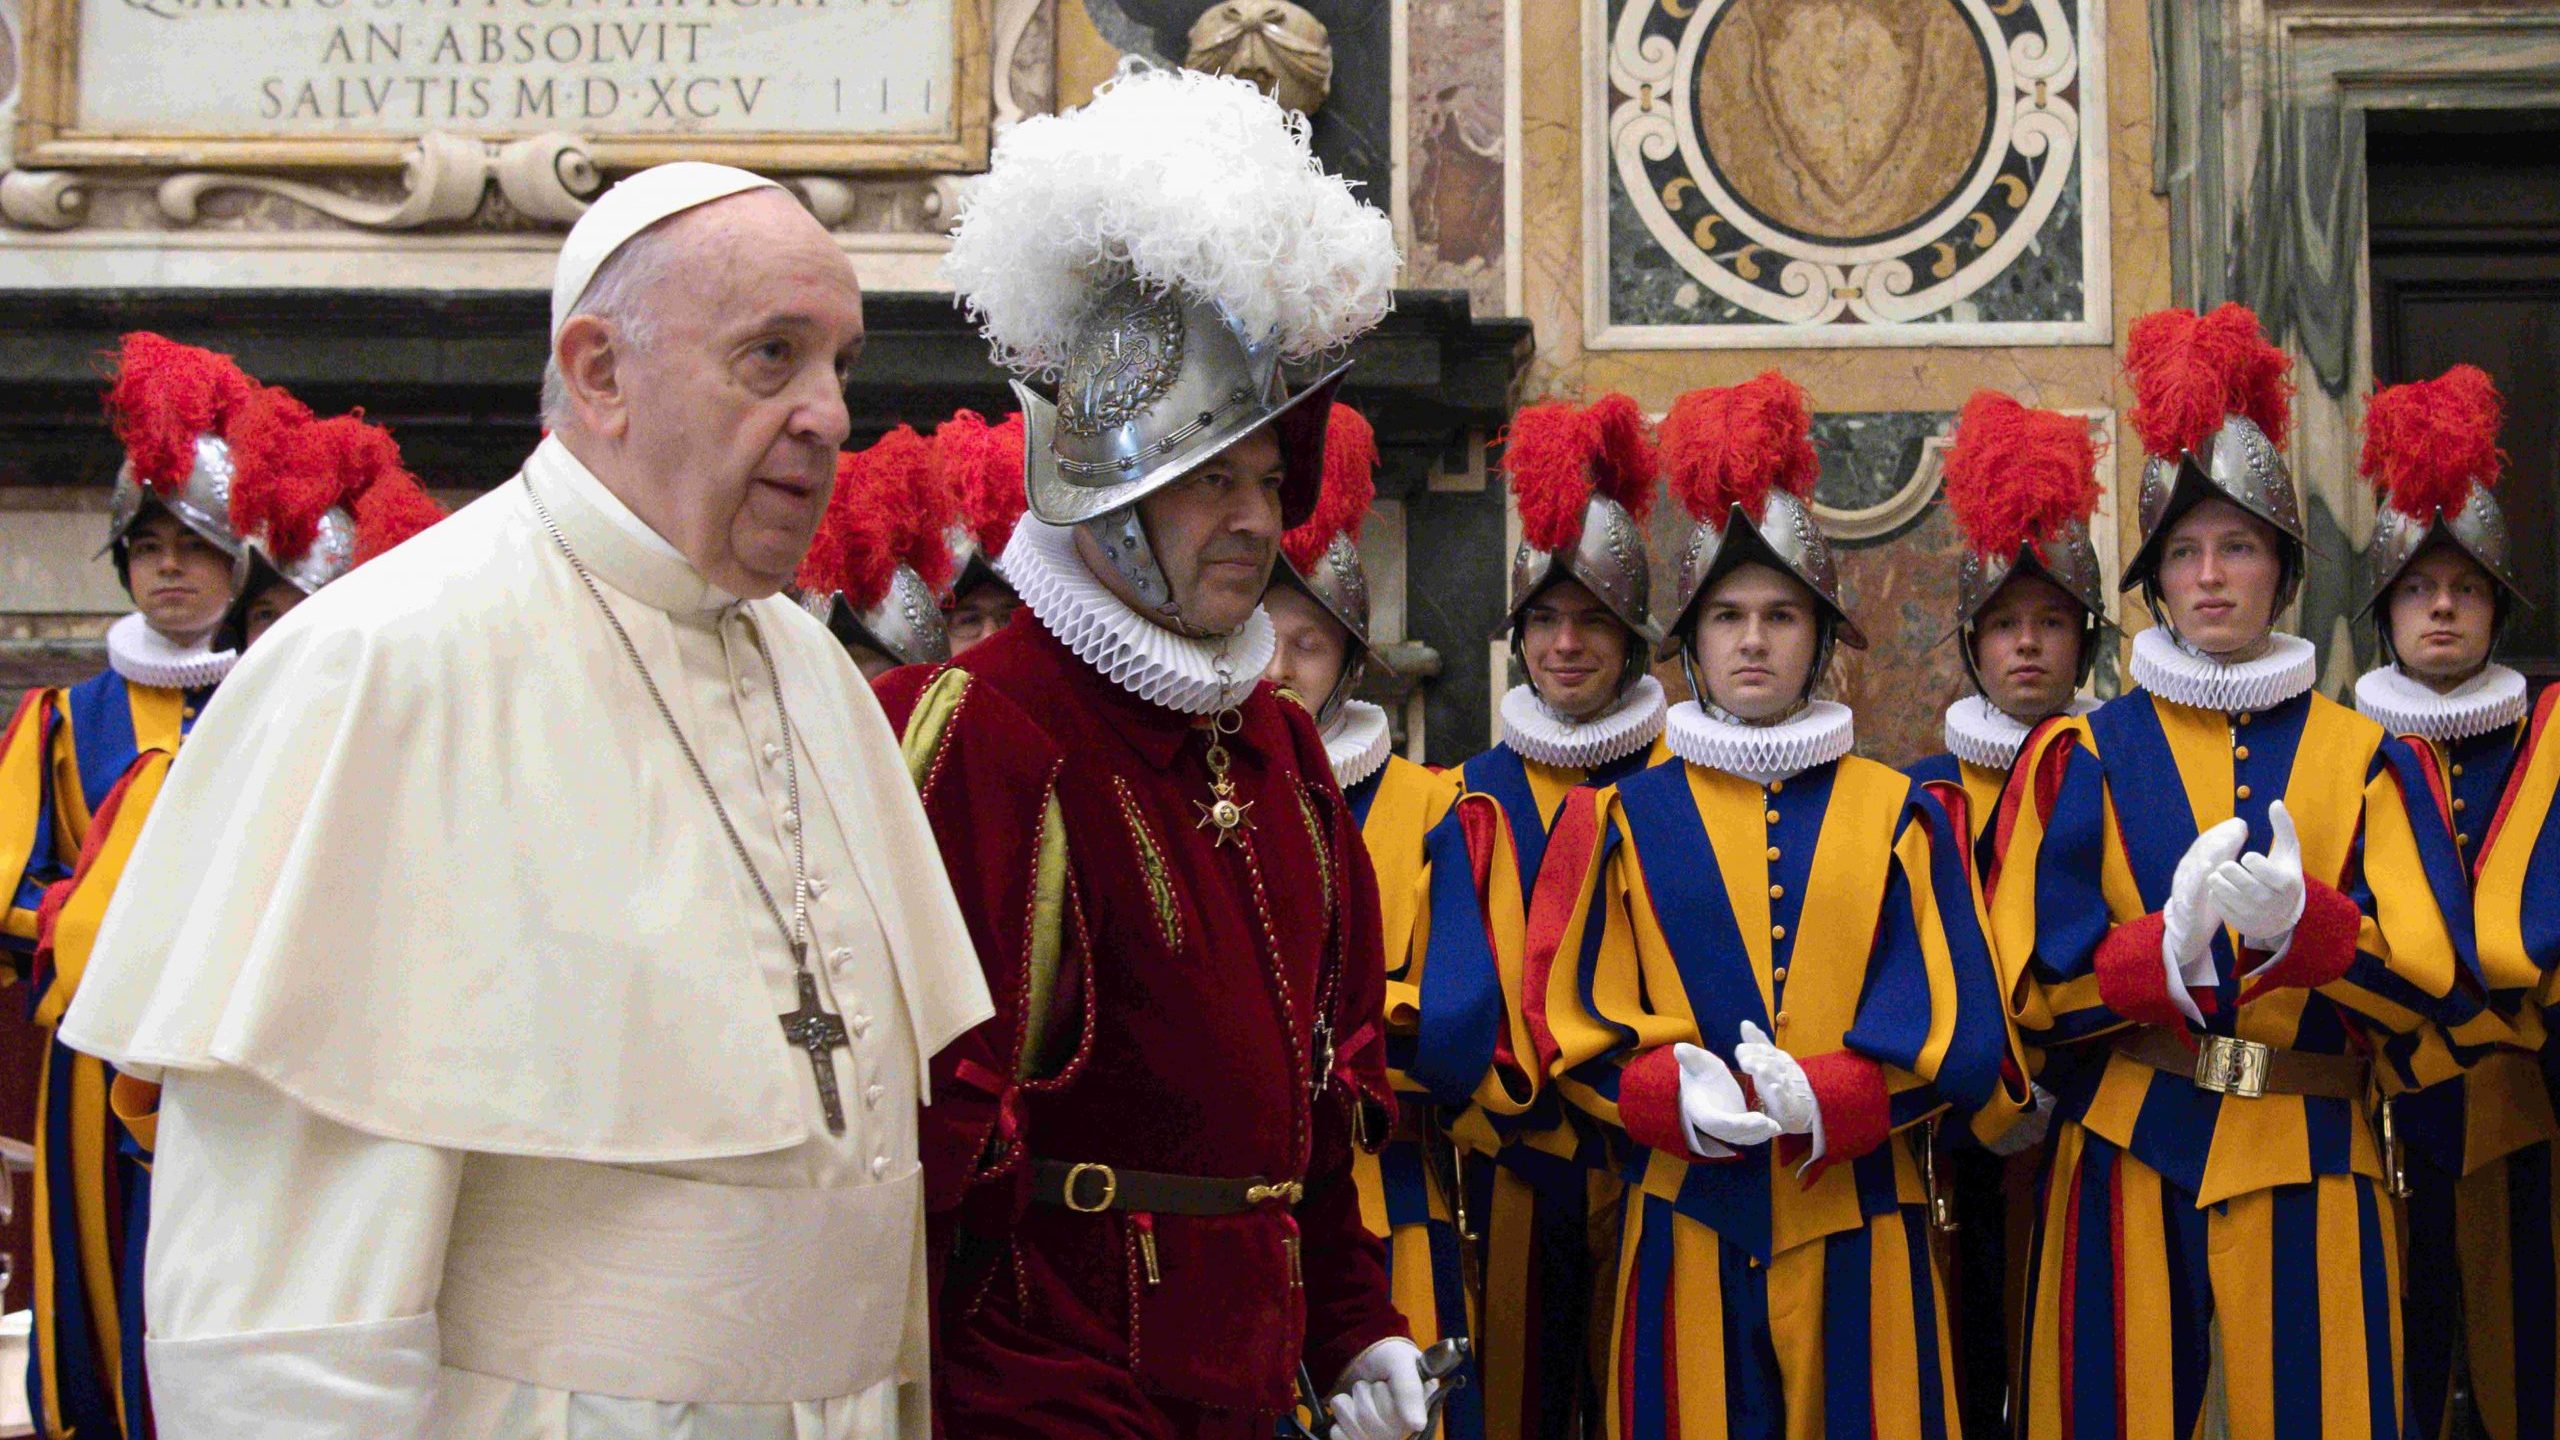 Be faithful to Christ, Pope Francis urges new Swiss Guard recruits |  Angelus News